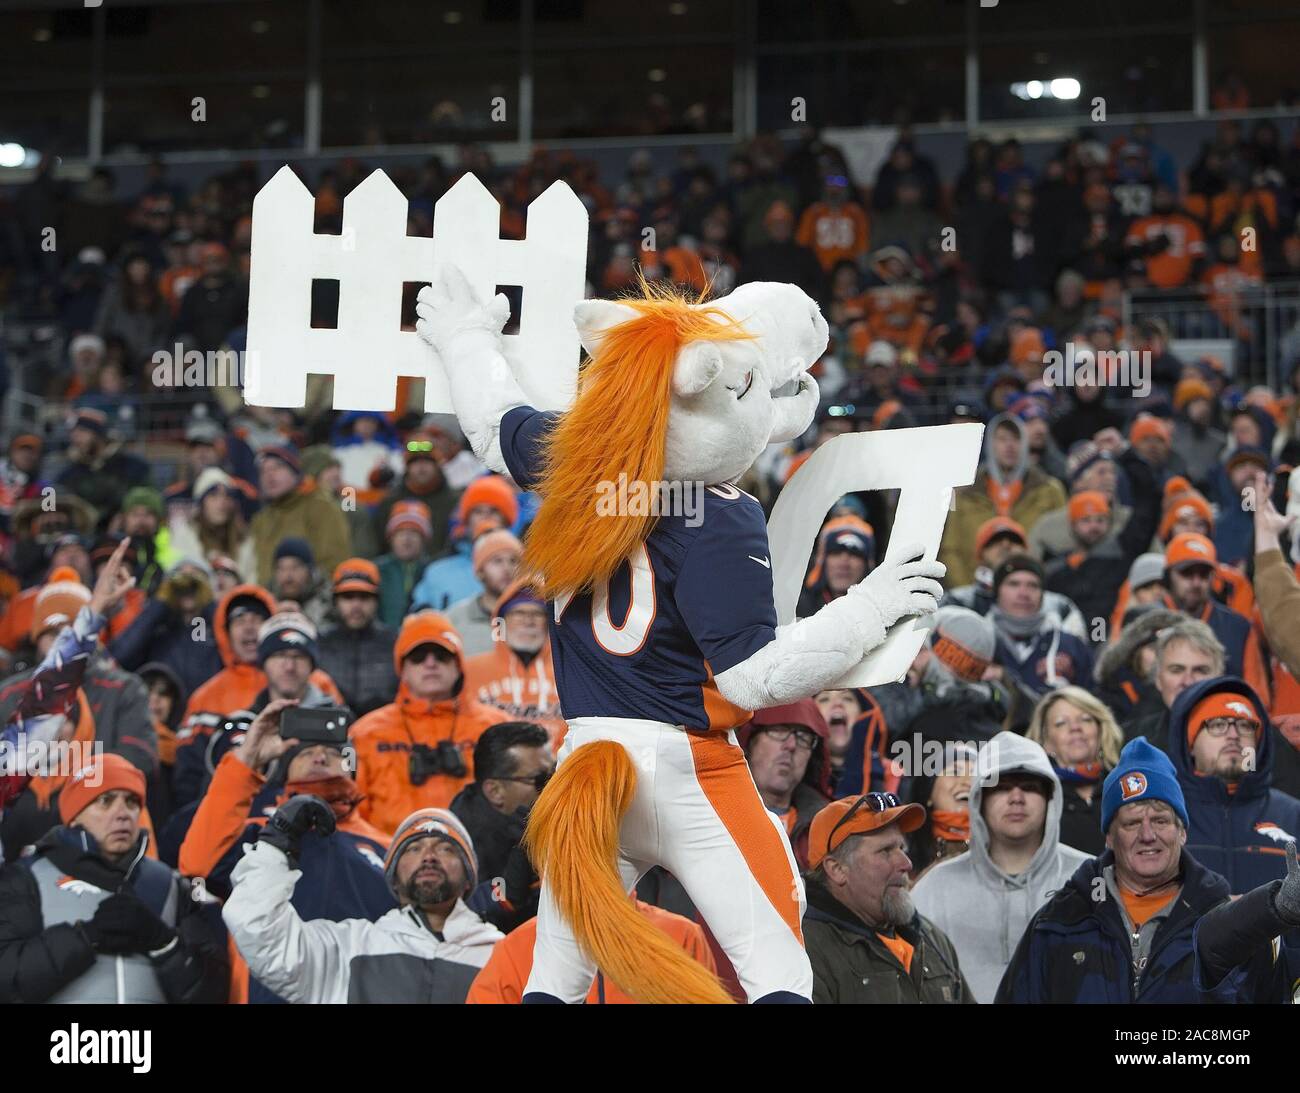 Denver, Colorado, USA. 1st Dec, 2019. Broncos Mascot MILES gets the crowd yelling for the Broncos defense during the 2nd. Half Sunday afternoon at Empower Field At Mile High in Denver CO. Broncos beat the Chargers 23-20. Credit: Hector Acevedo/ZUMA Wire/Alamy Live News Stock Photo